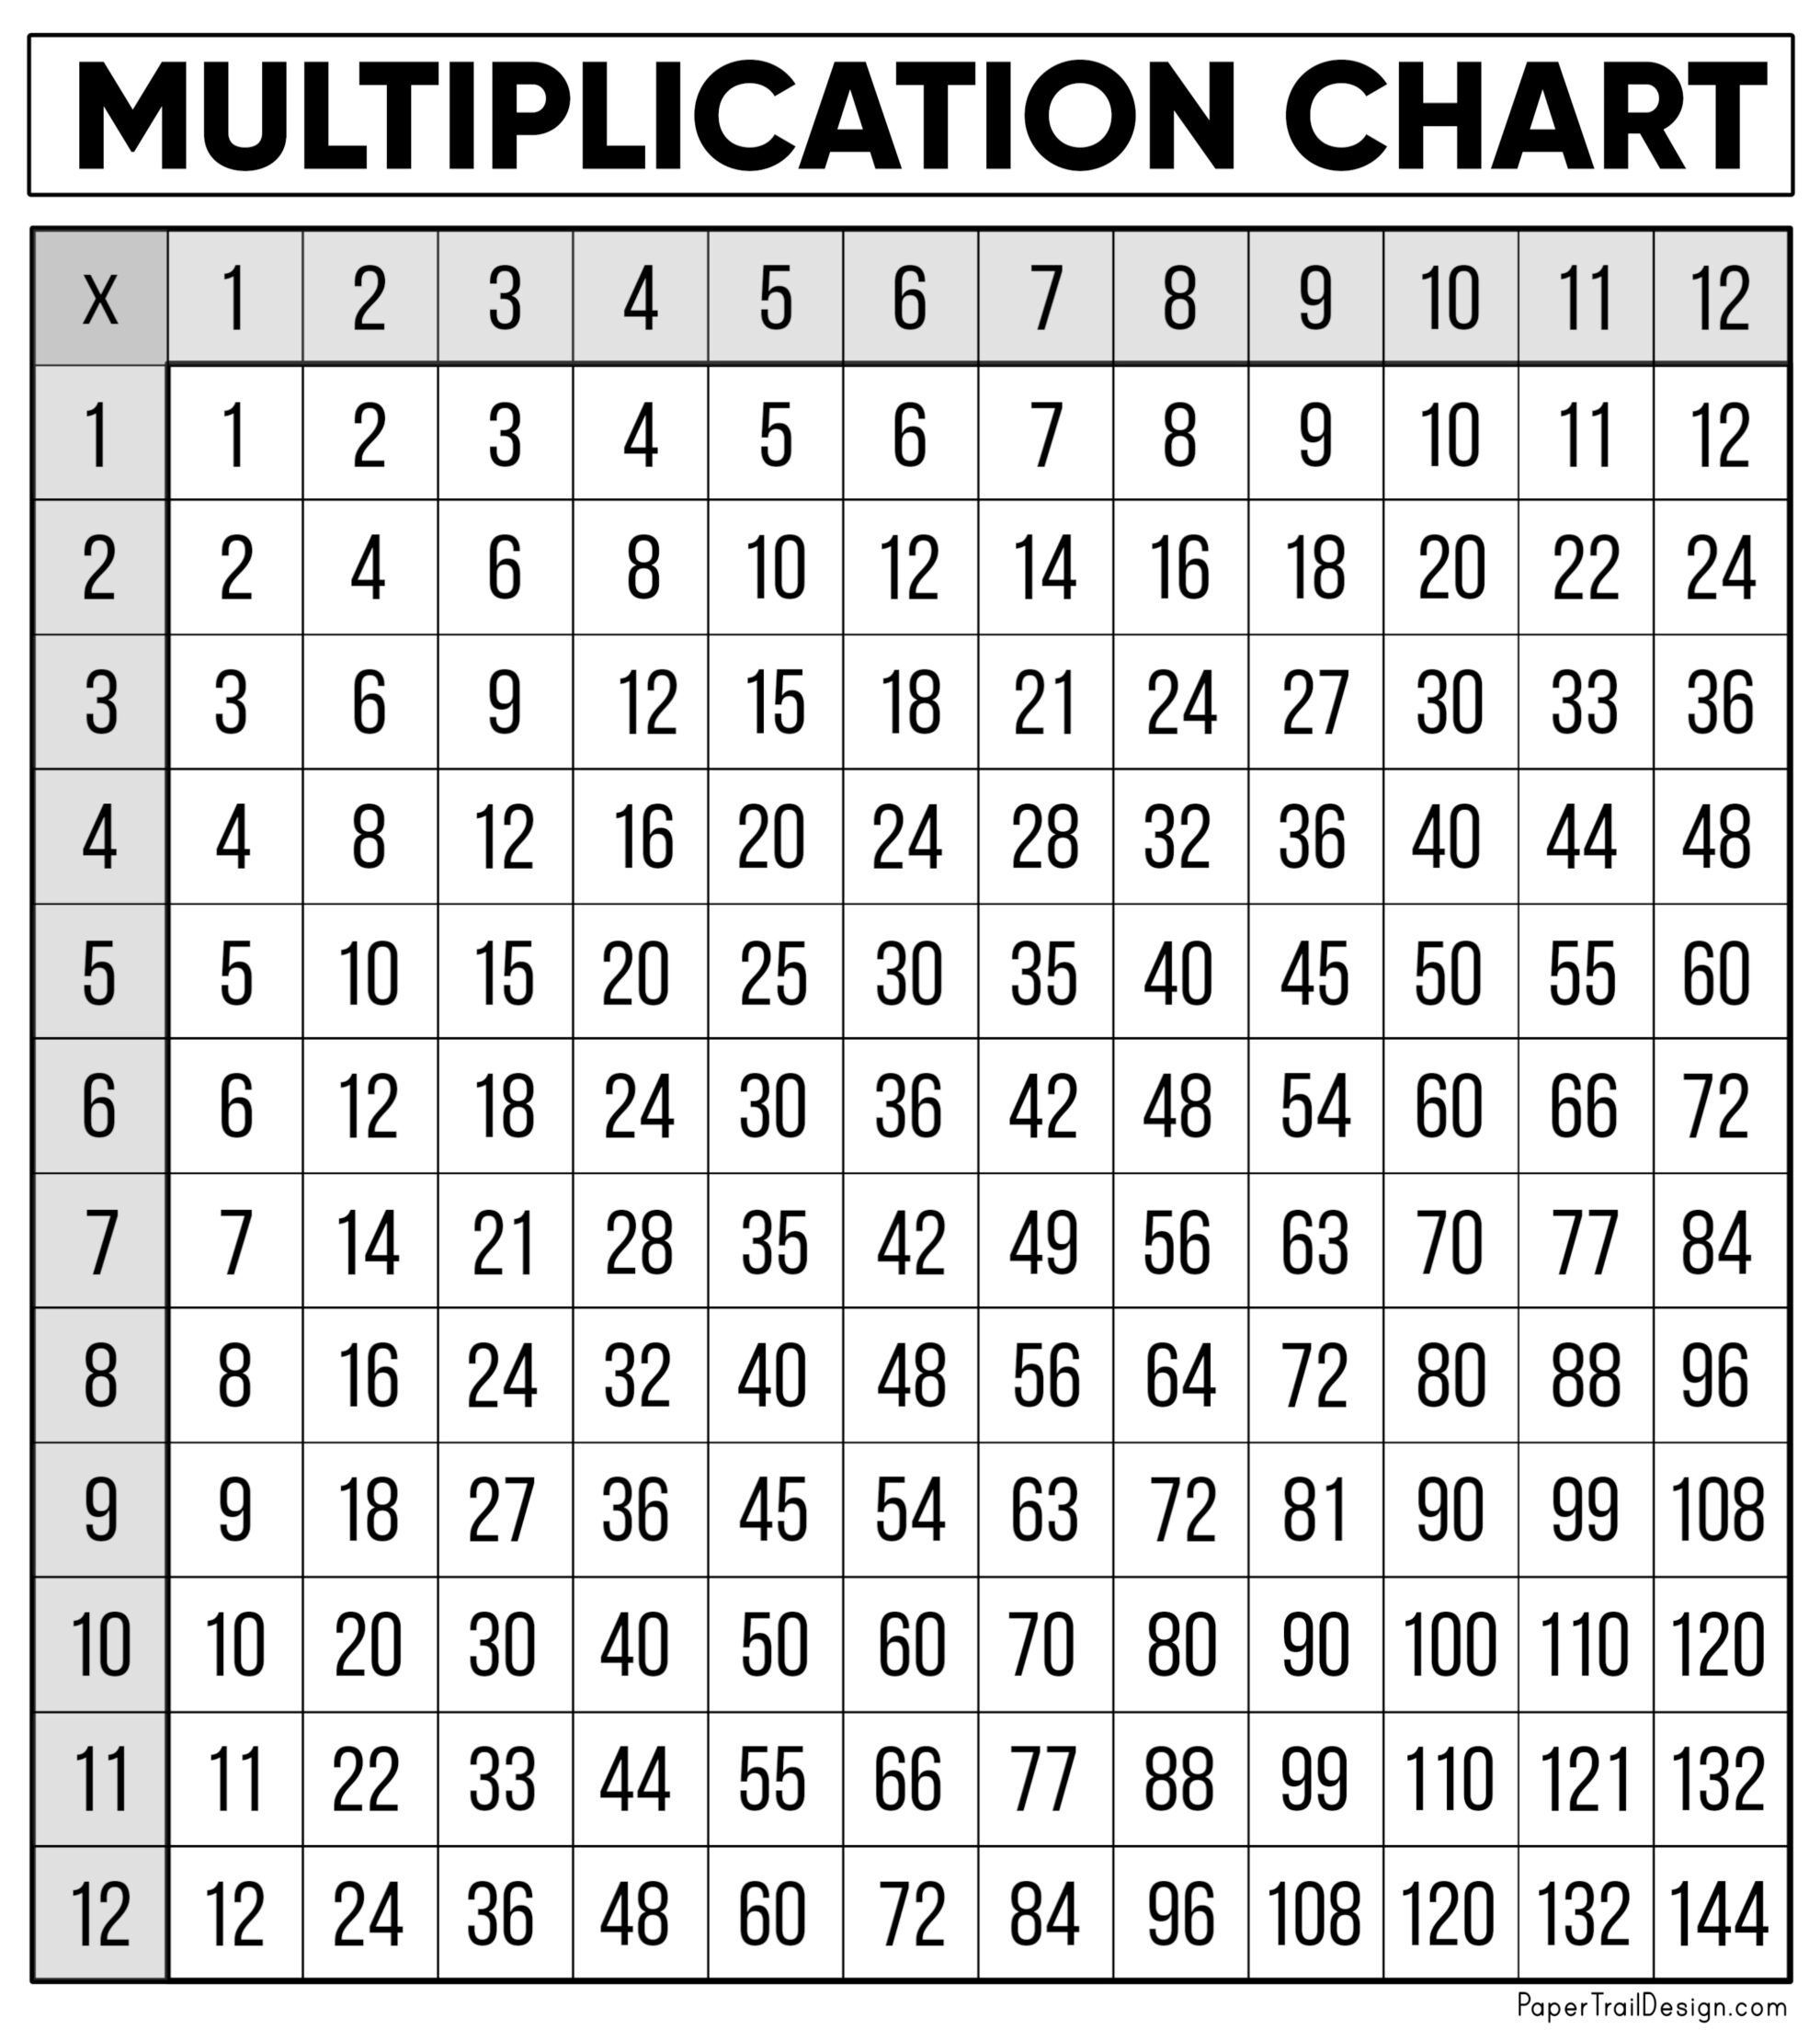 Free Multiplication Chart Printable Paper Trail Design In 2021 